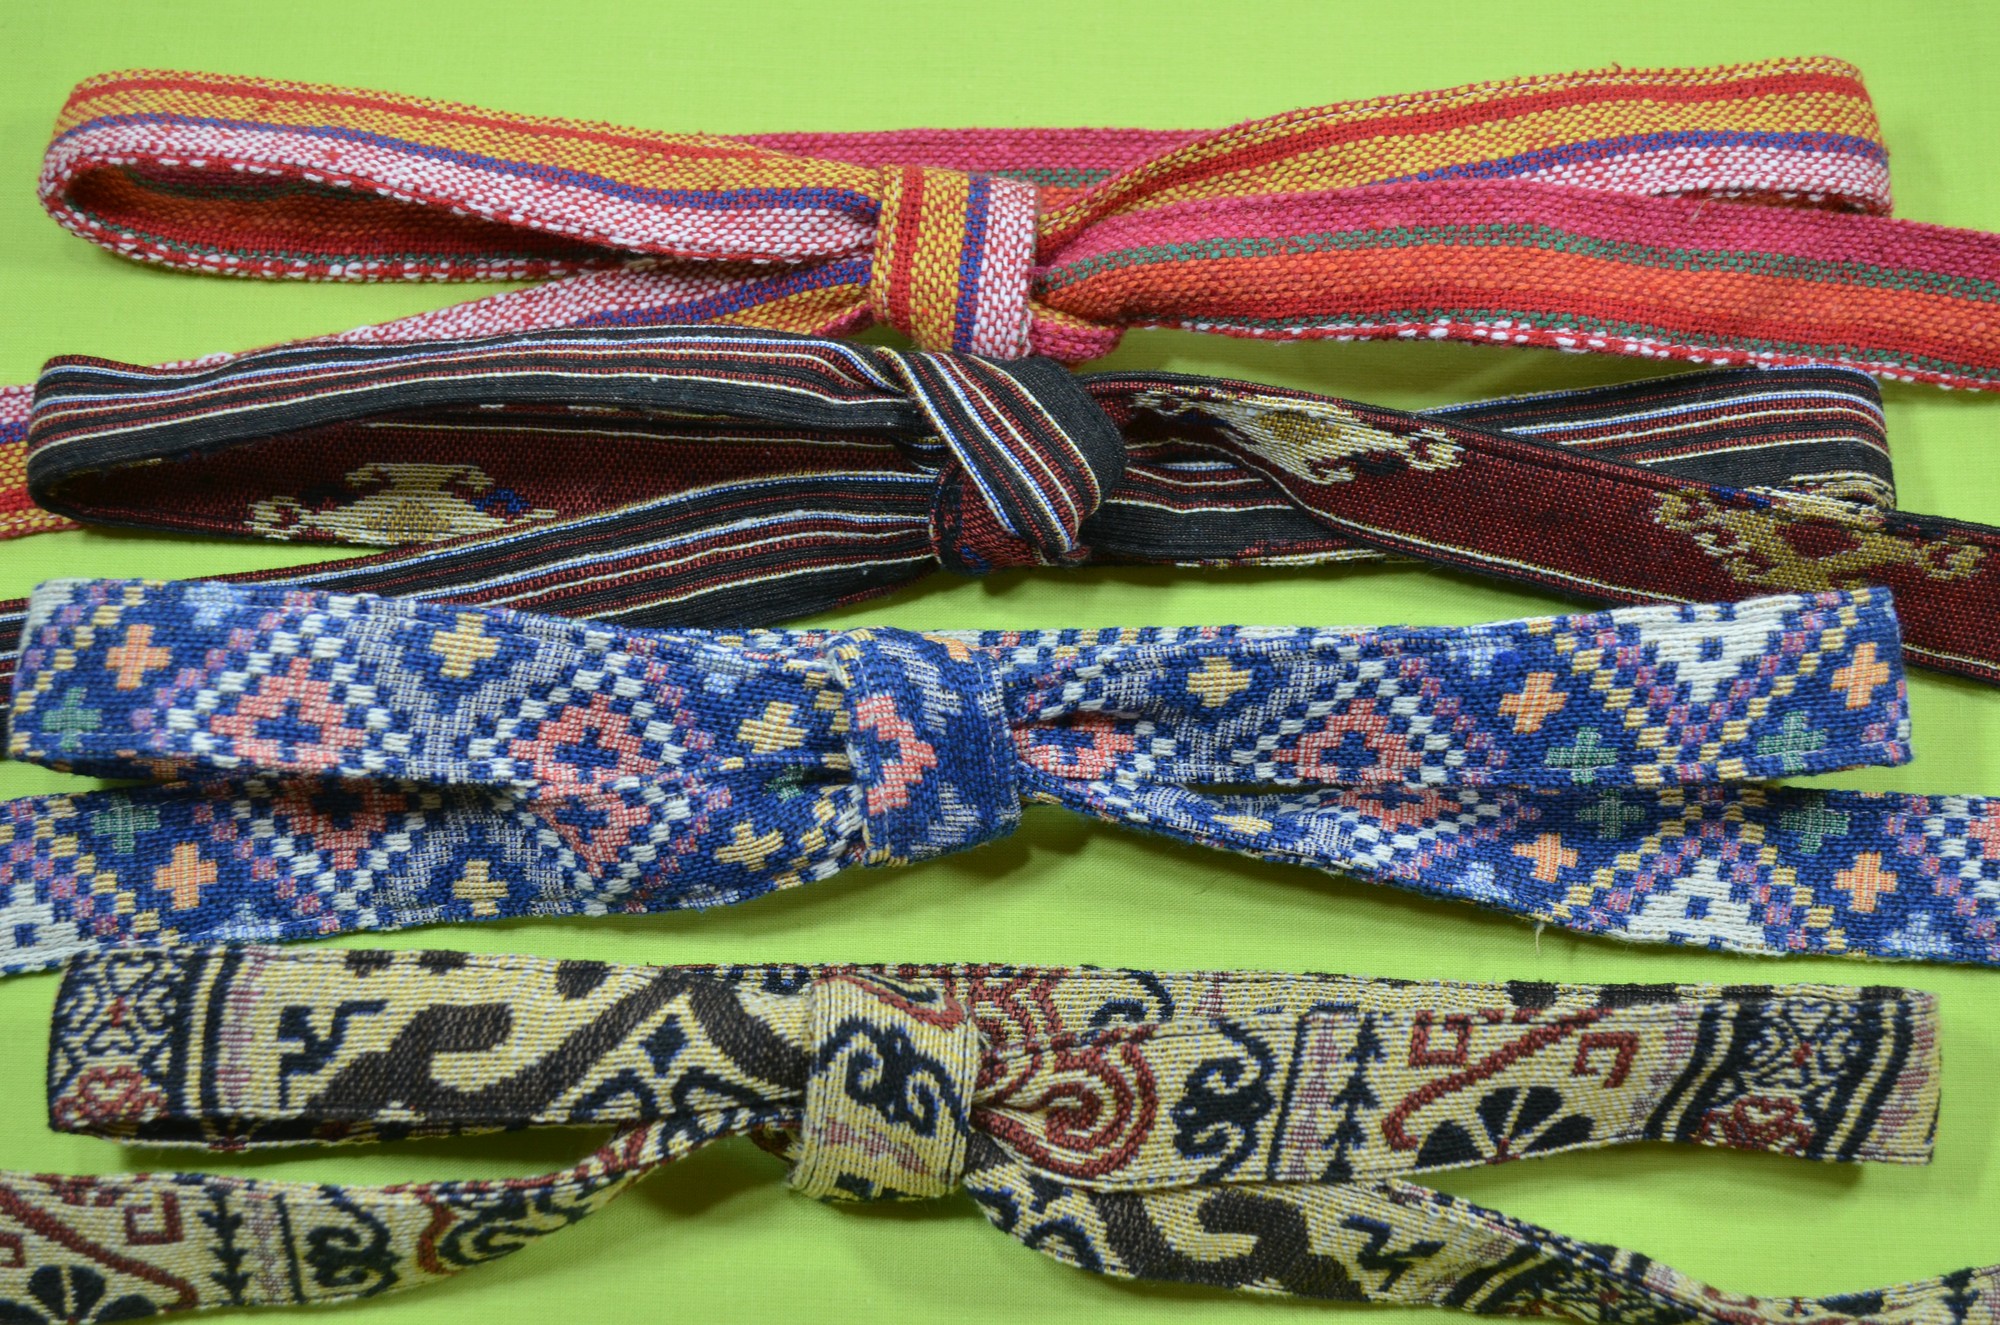 Handmade textile belt in an ethnic style.